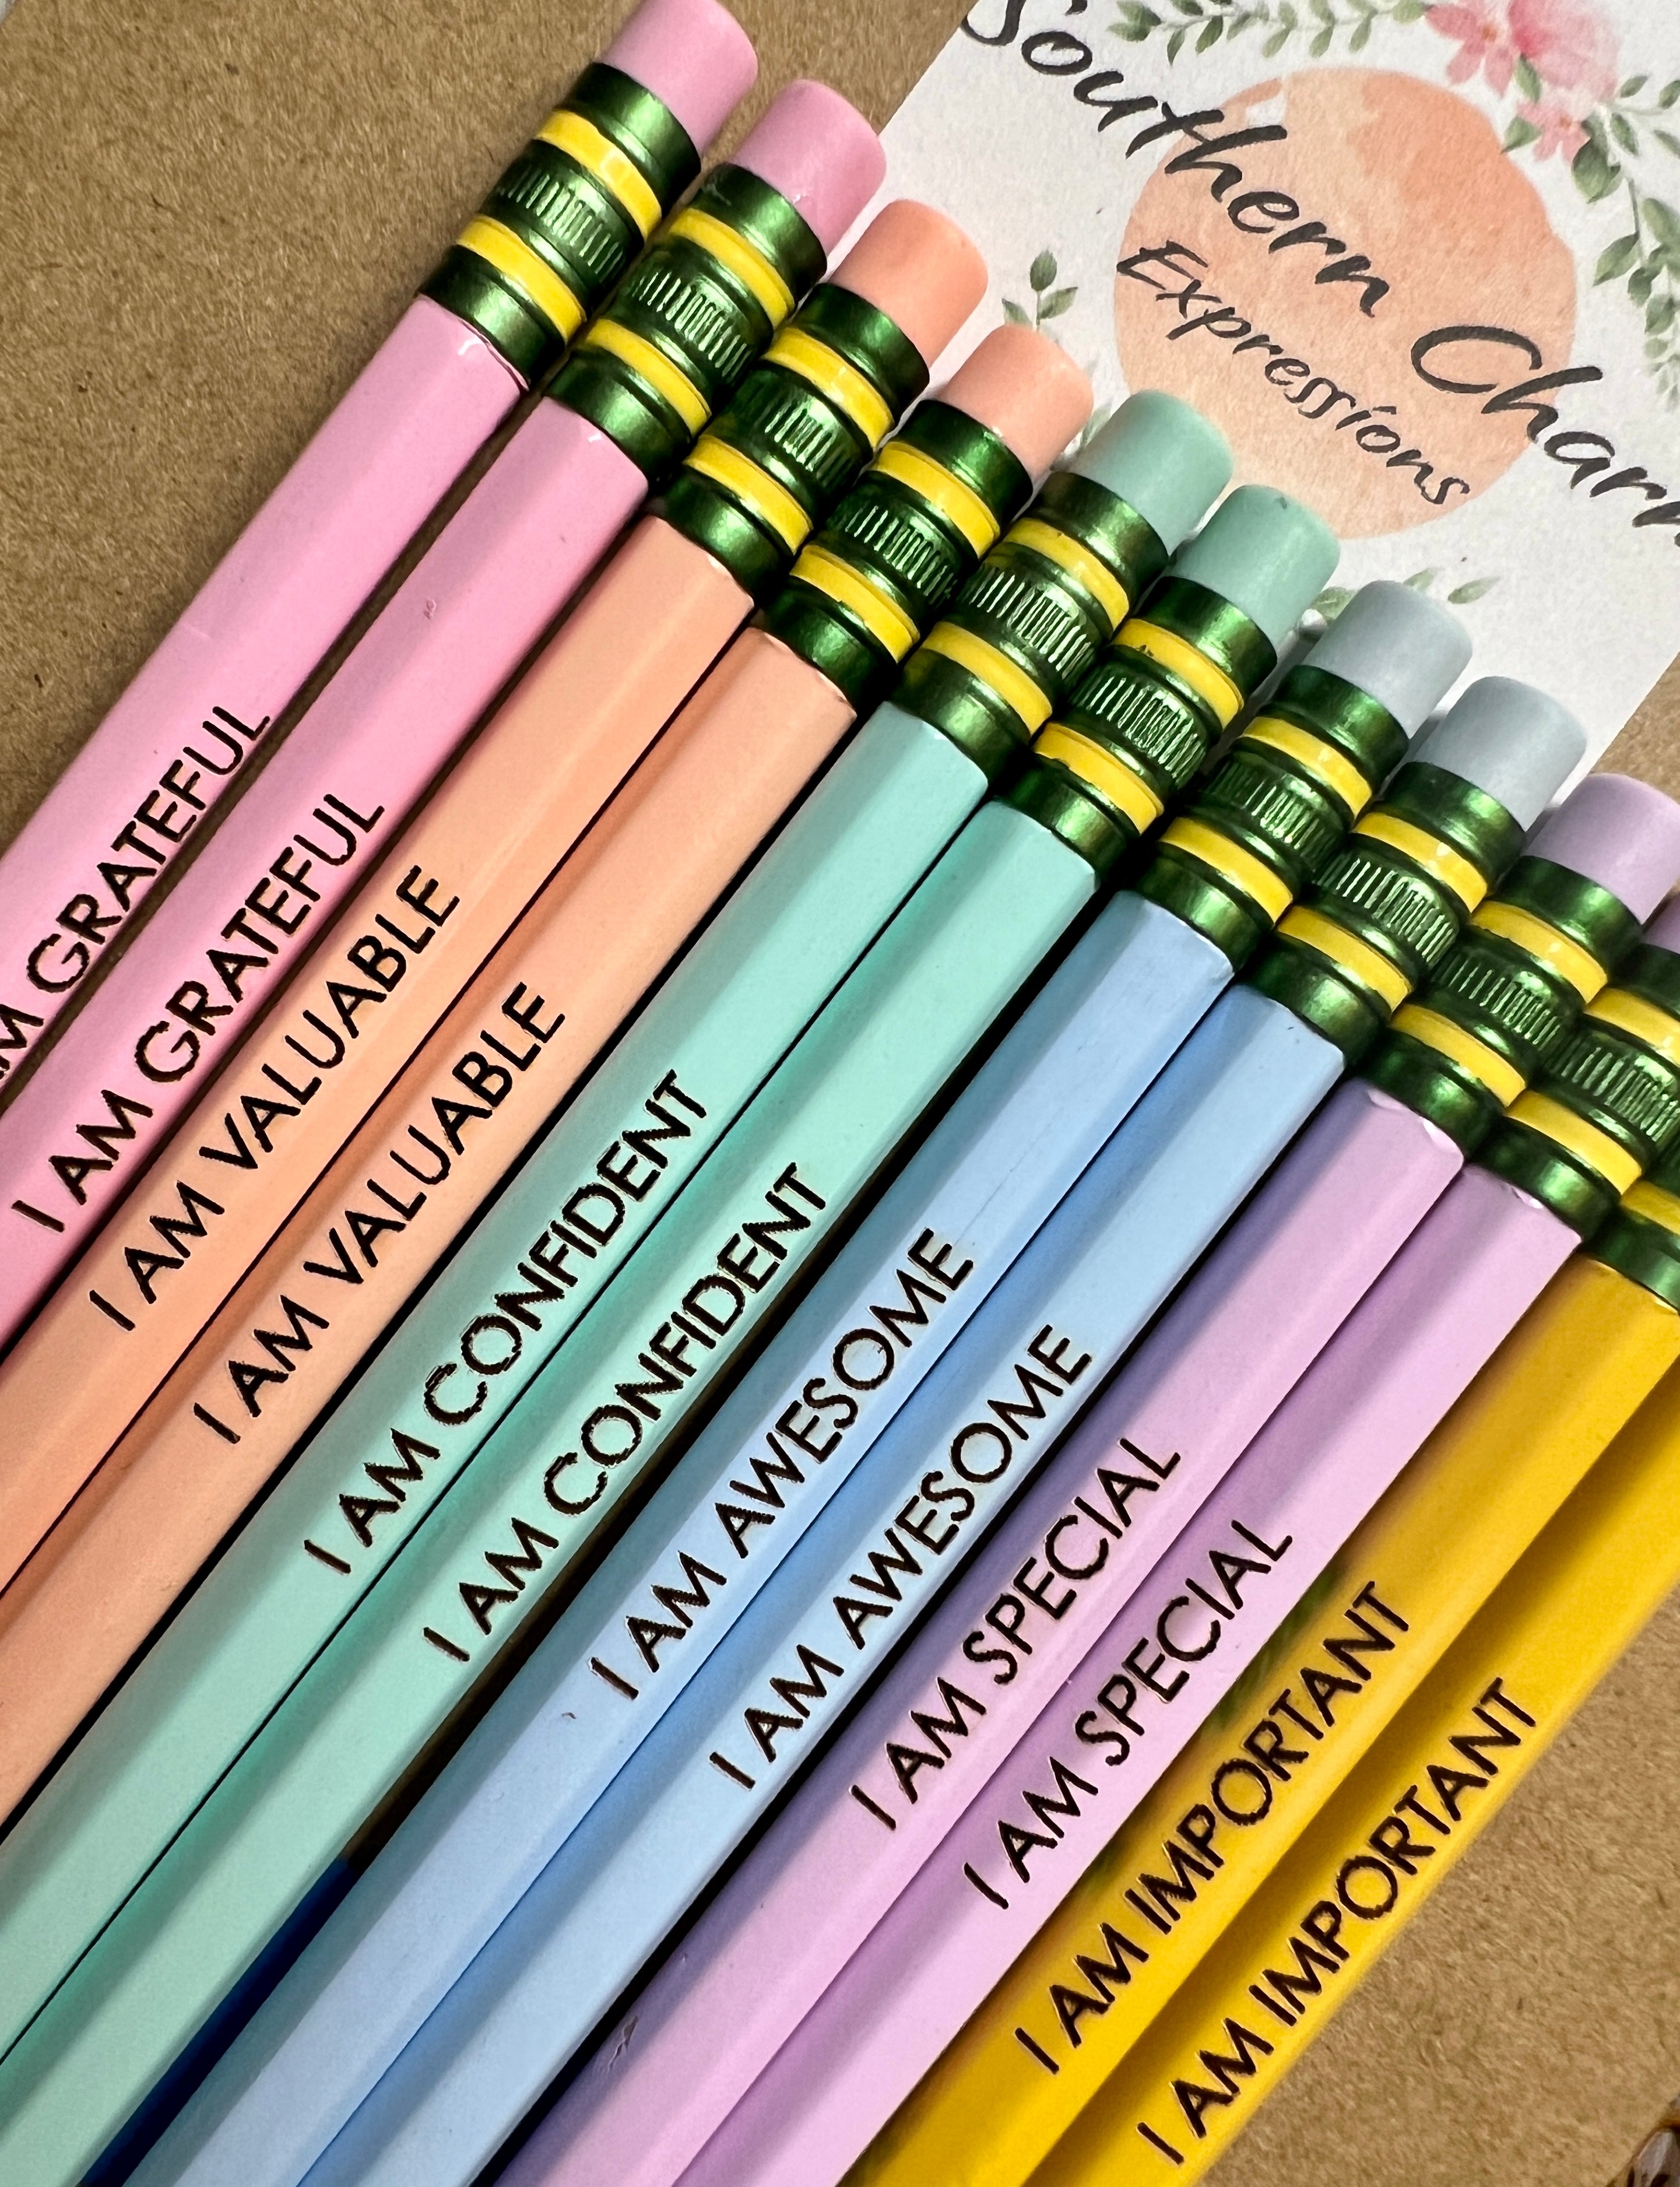  OJDXDY Affirmation Pencil Set of 10, Motivational Pencils,  Personalized Compliment Wood Pencils, Pencil Set for Sketching and Drawing,  Gift for Students and Teachers : Office Products